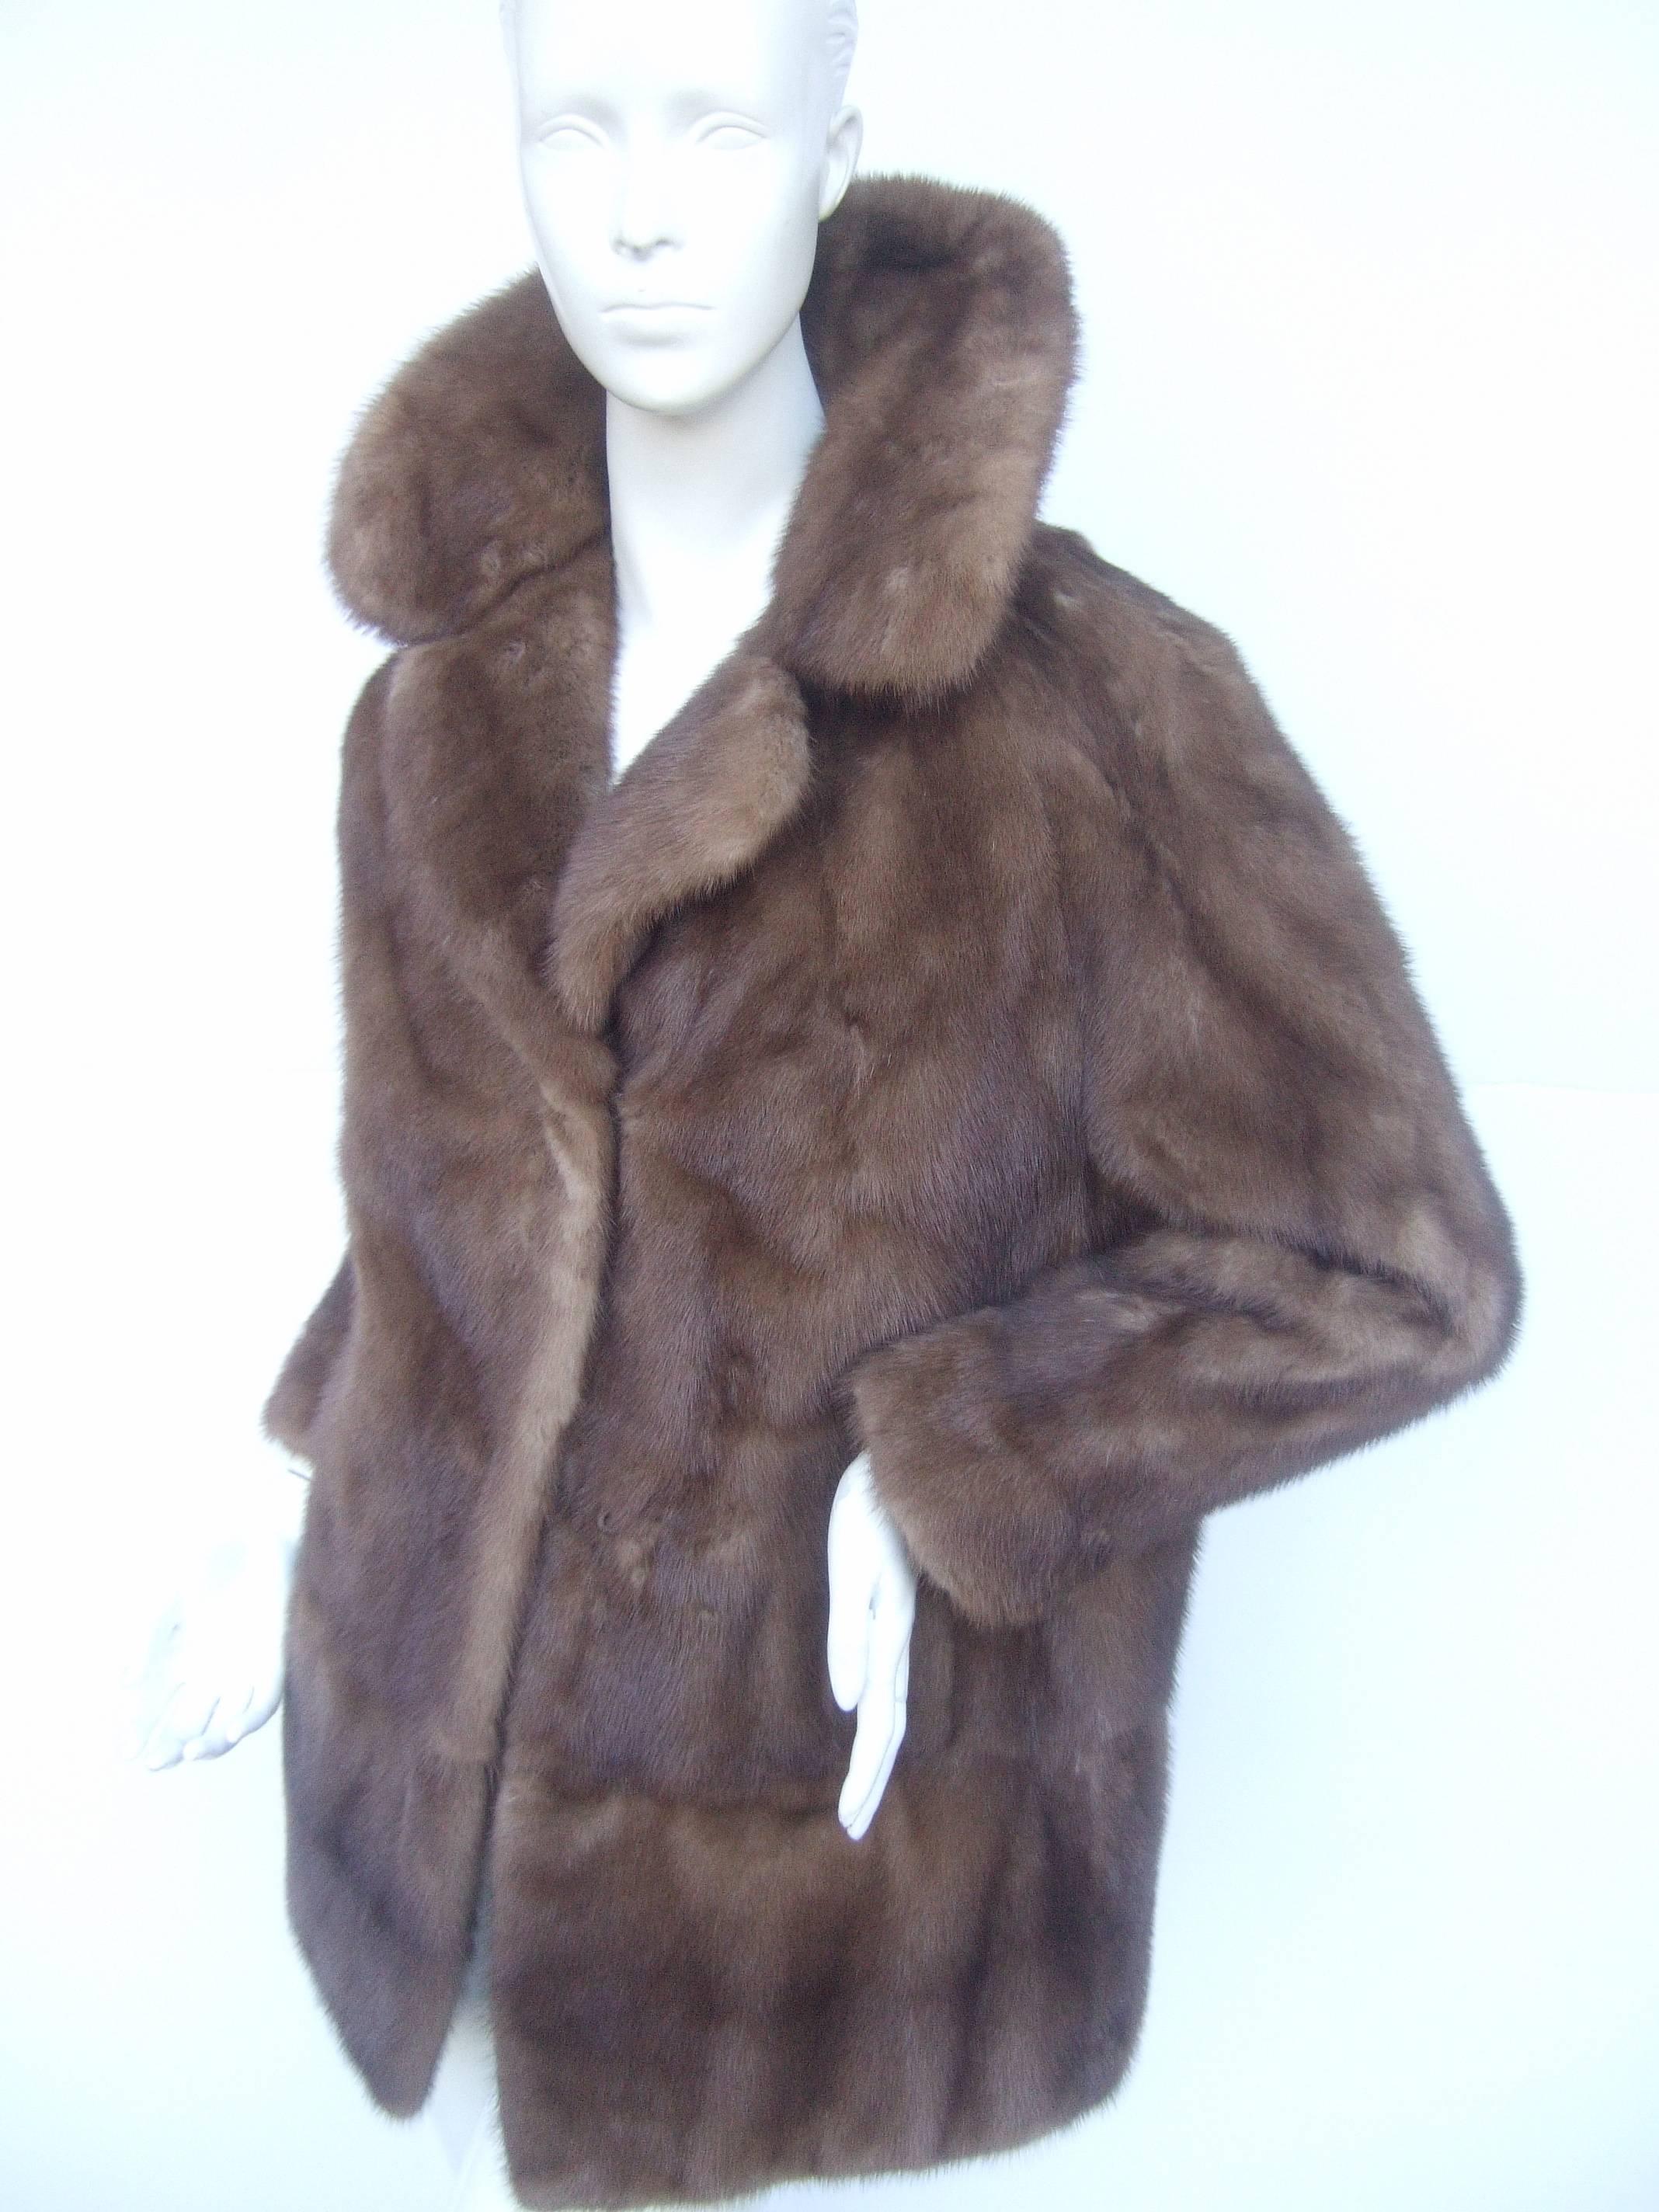 Luxurious plush autumn haze mink fur jacket
The elegant mink fur jacket is designed
with medium brown sumptuous mink fur

The lower hemline has an eight inch panel 
that circles around the bottom of the jacket 

The wide dramatic collar can